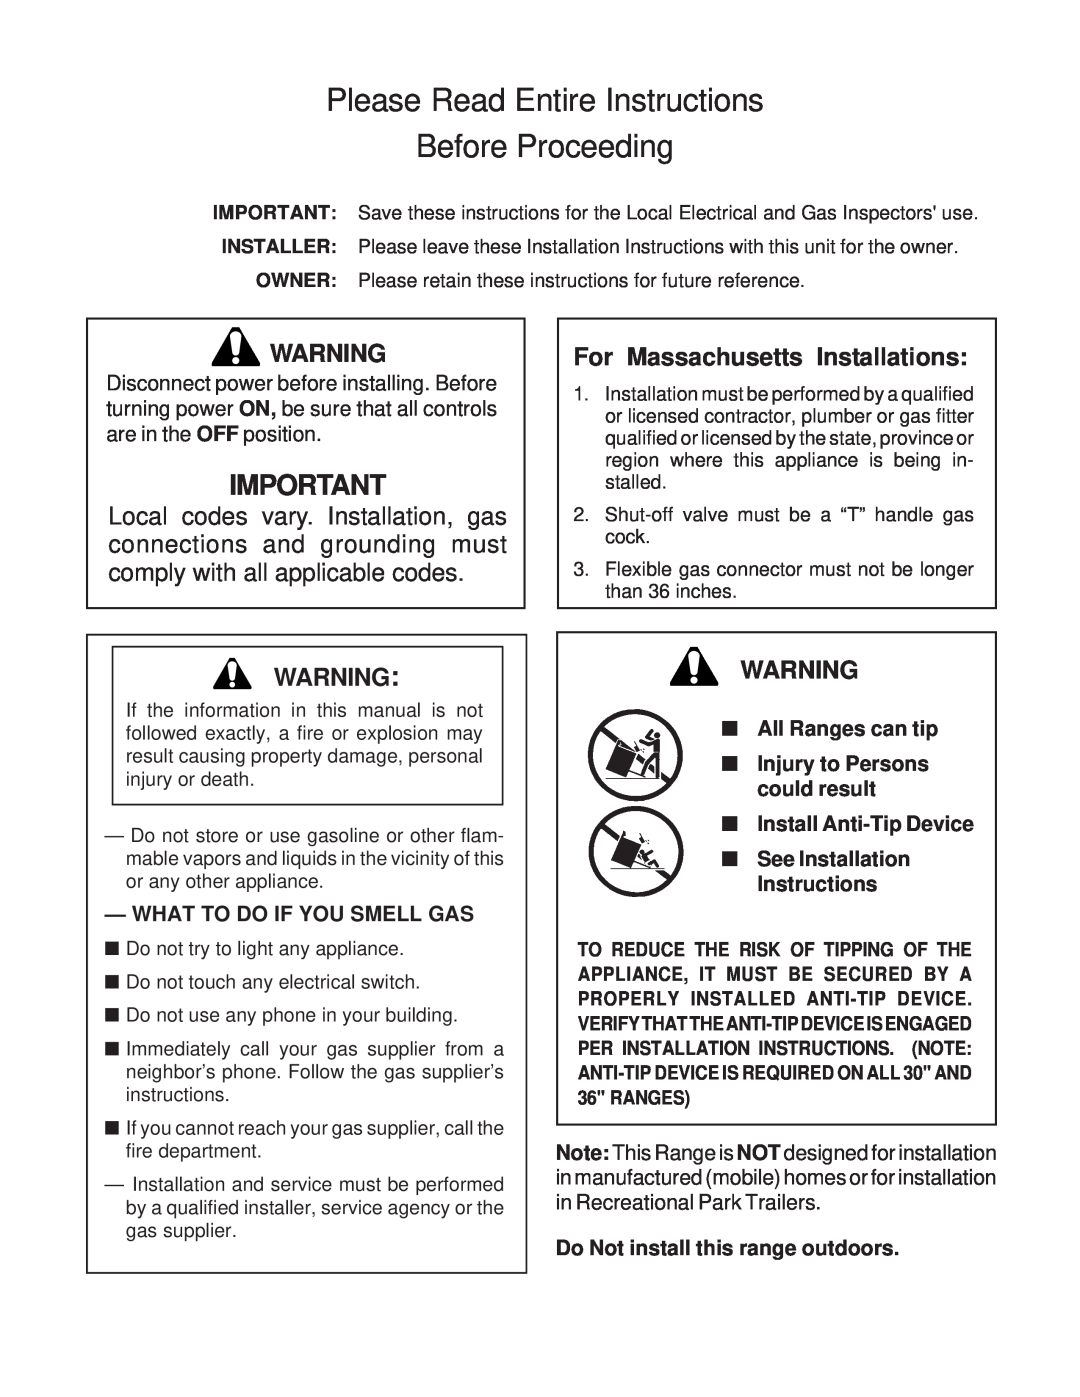 Thermador 336 Please Read Entire Instructions Before Proceeding, For Massachusetts Installations, Install Anti-TipDevice 